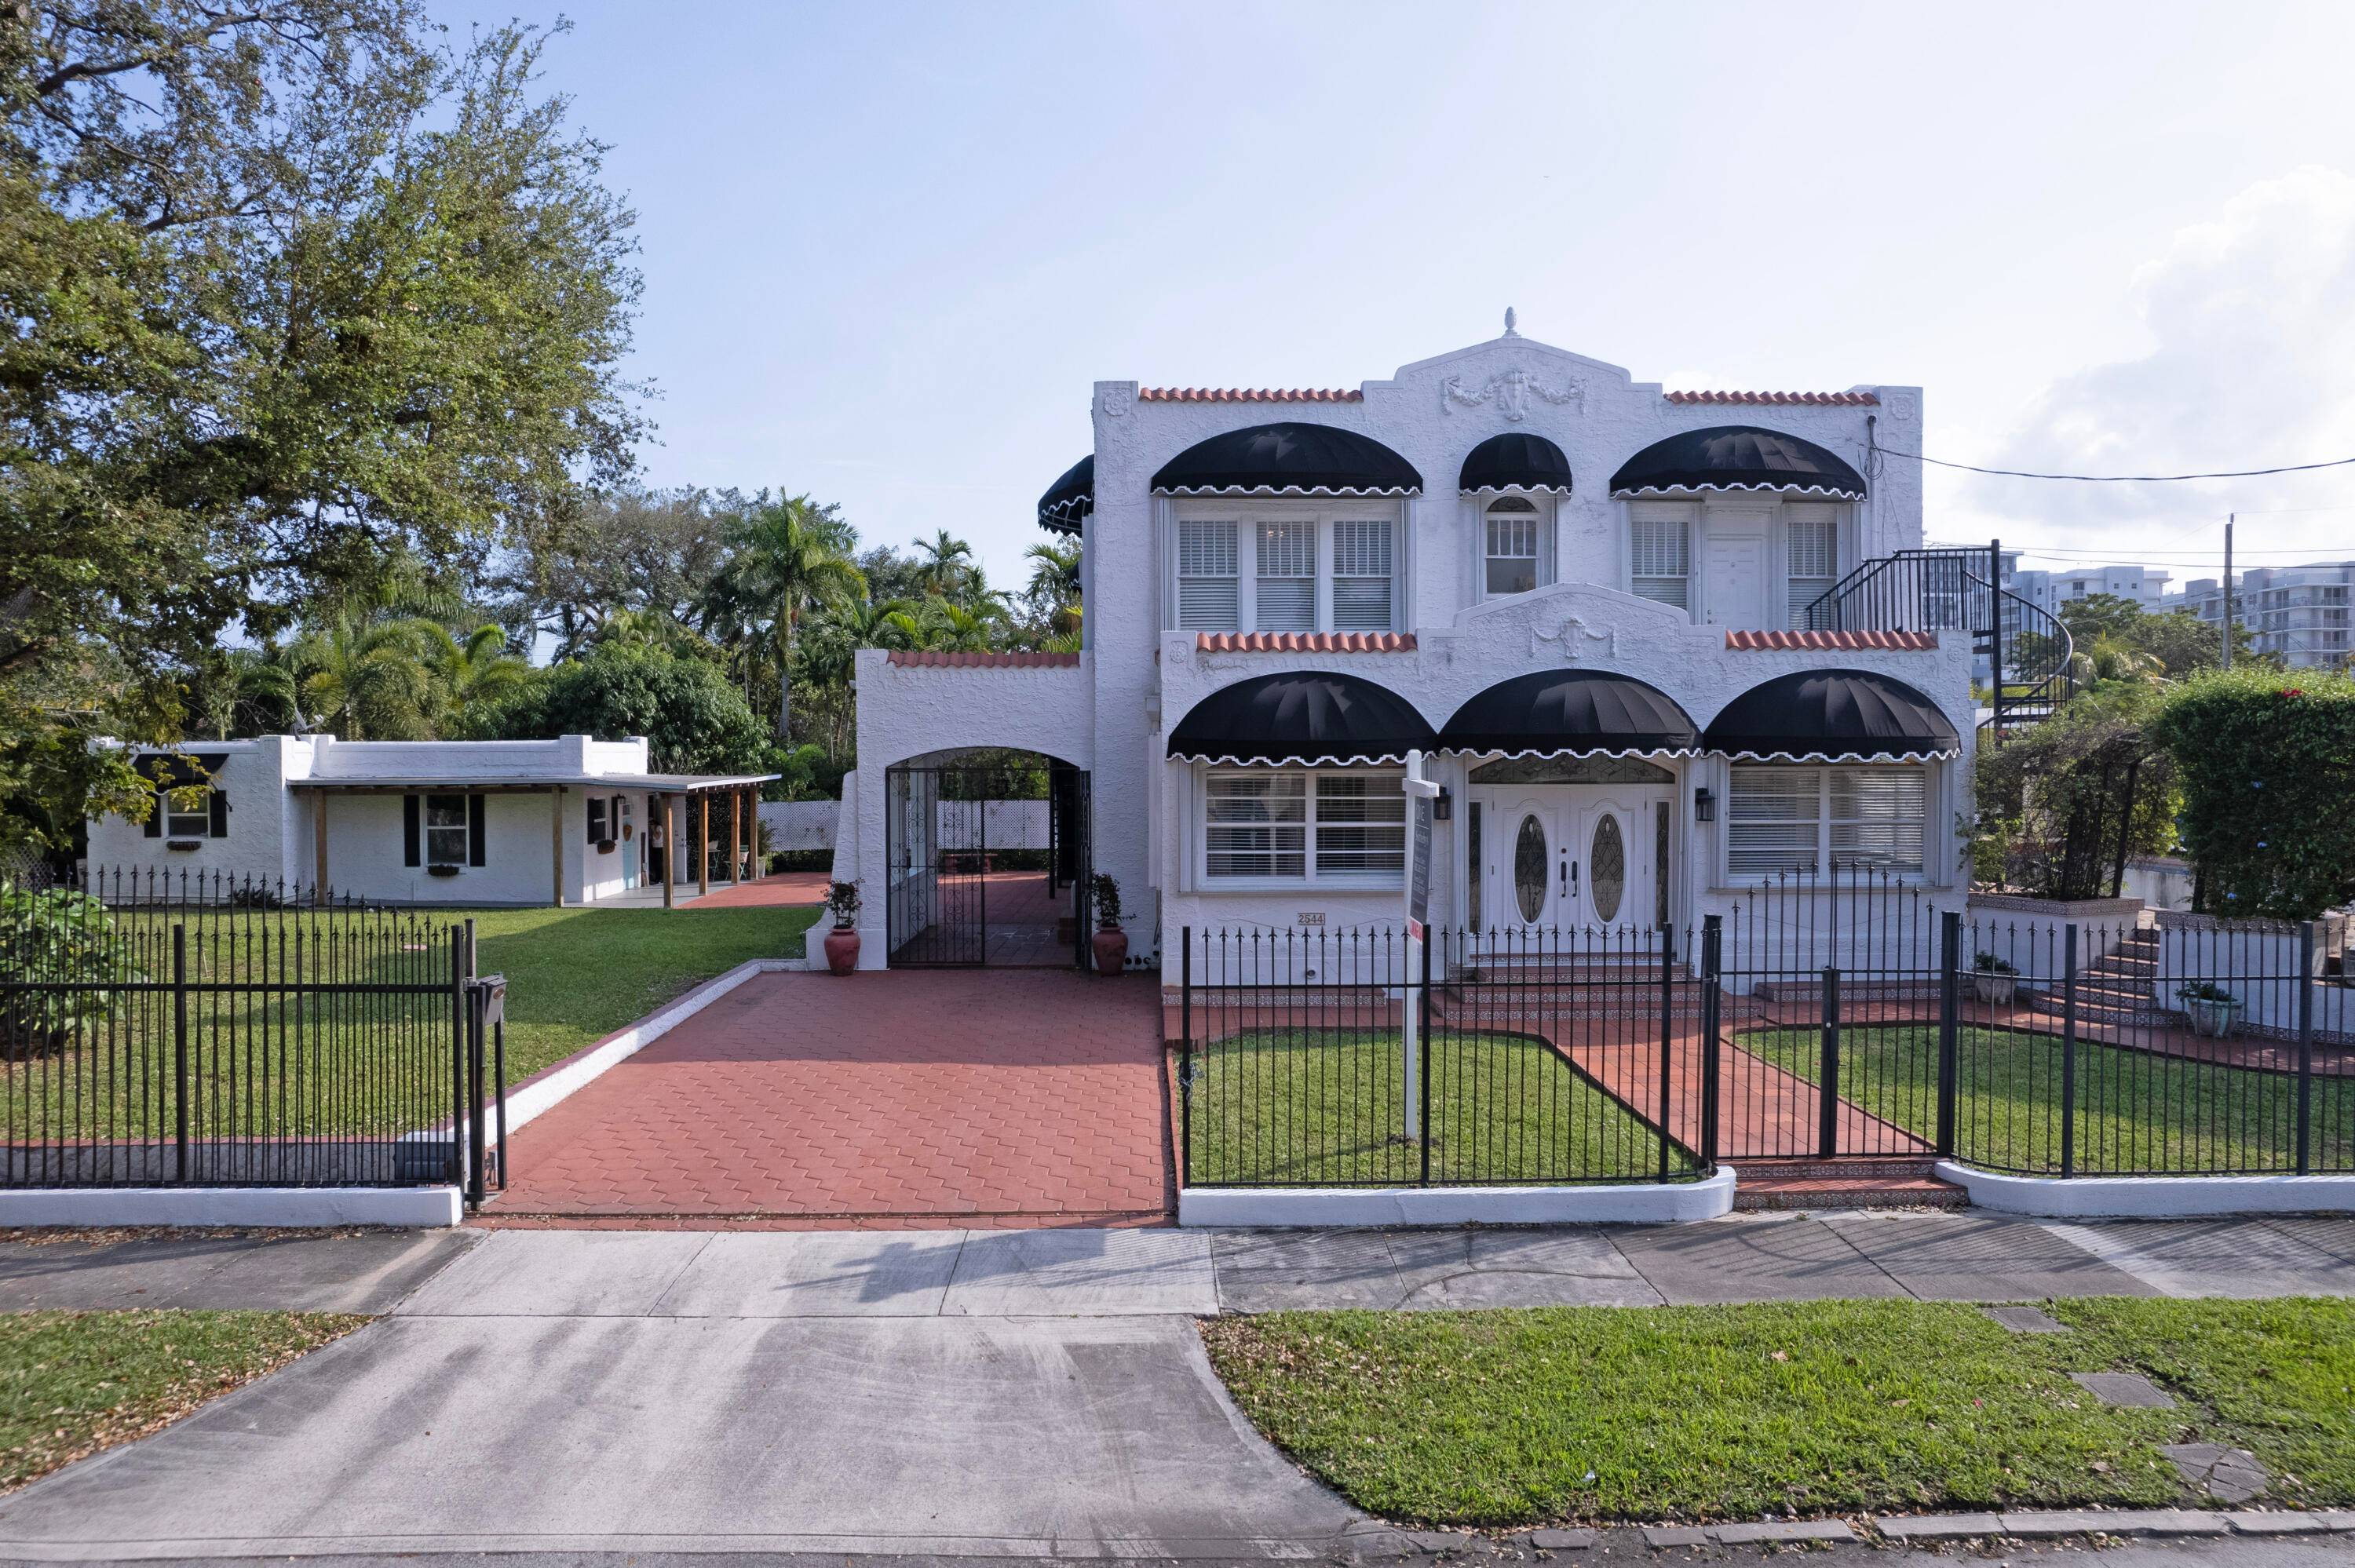 This stunning 1925 Mediterranean home in the heart of Silver Bluff boasts 5 bedrooms, 4 1 2 bathrooms, a guest house, and a pool.